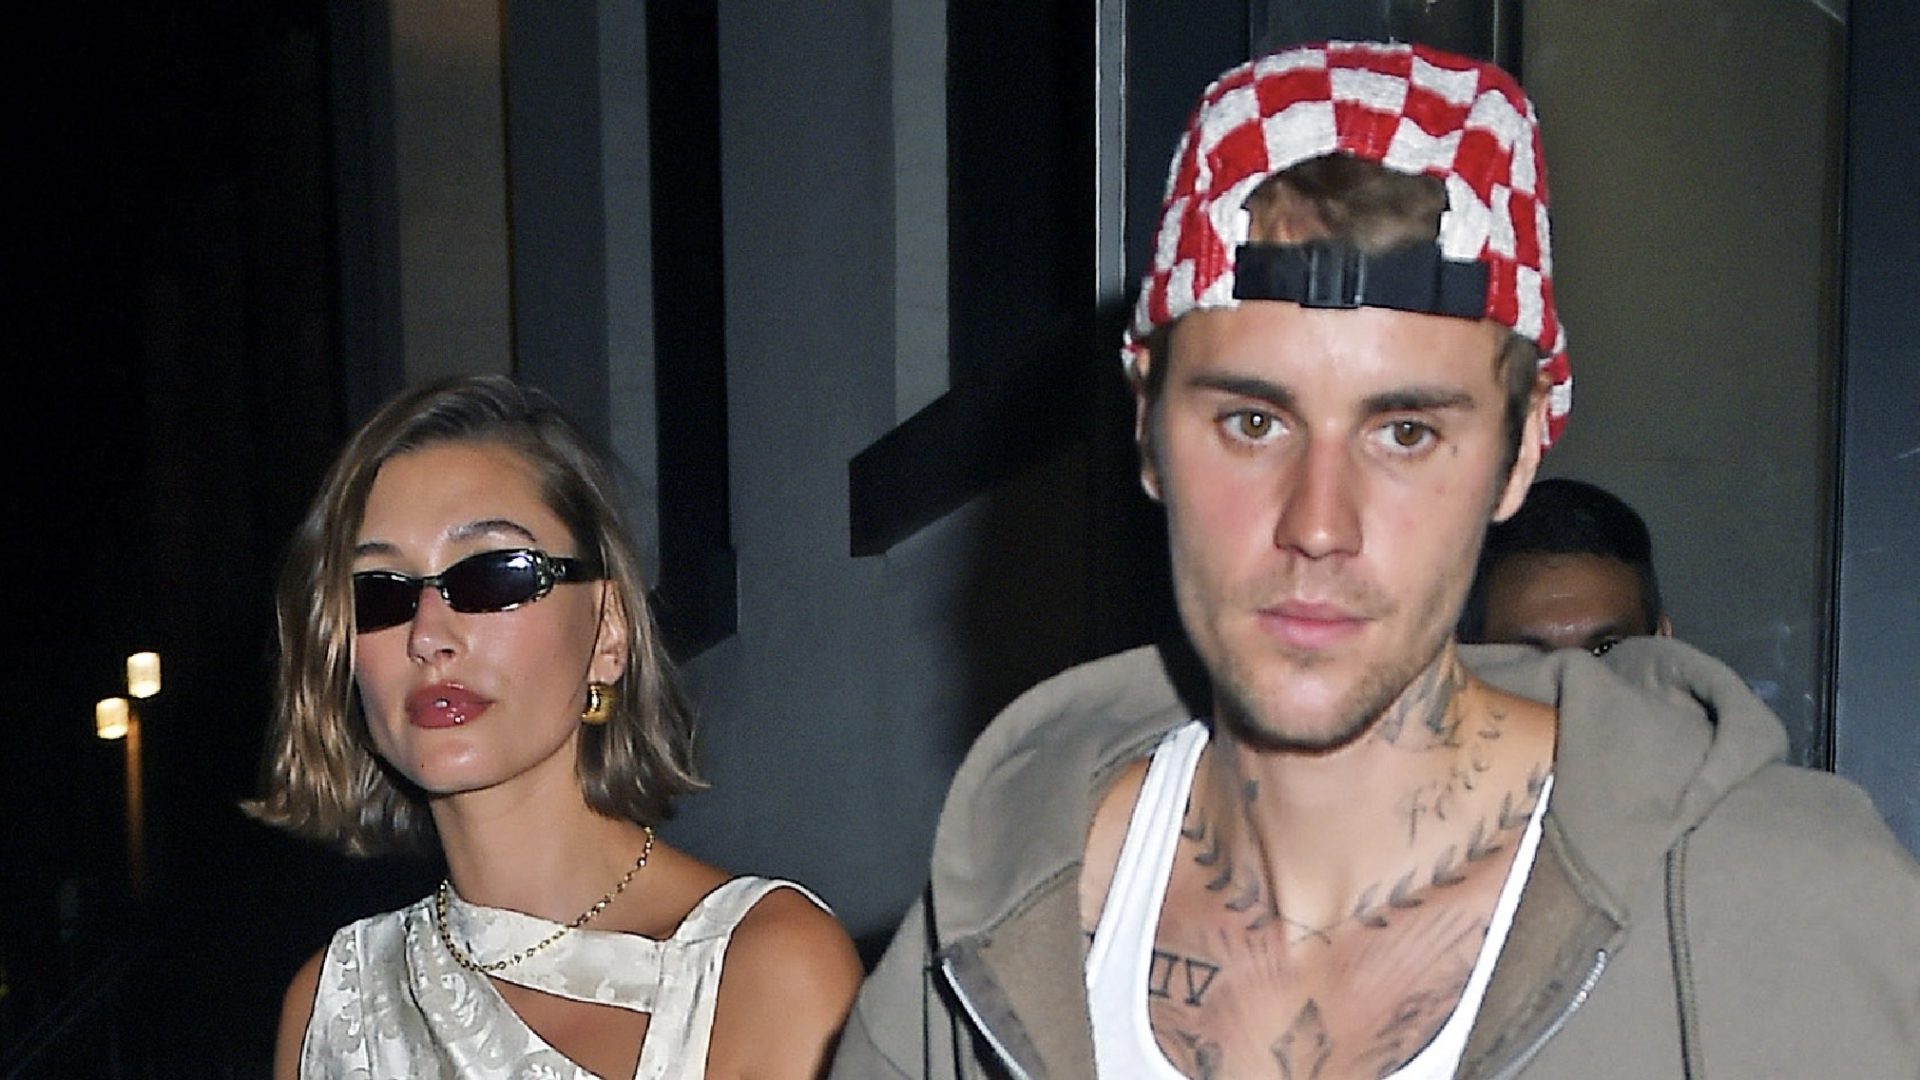 Justin Bieber Sparks Reactions From His Wife Hailey & Fans After Posting Concerning Photos Of Himself thumbnail